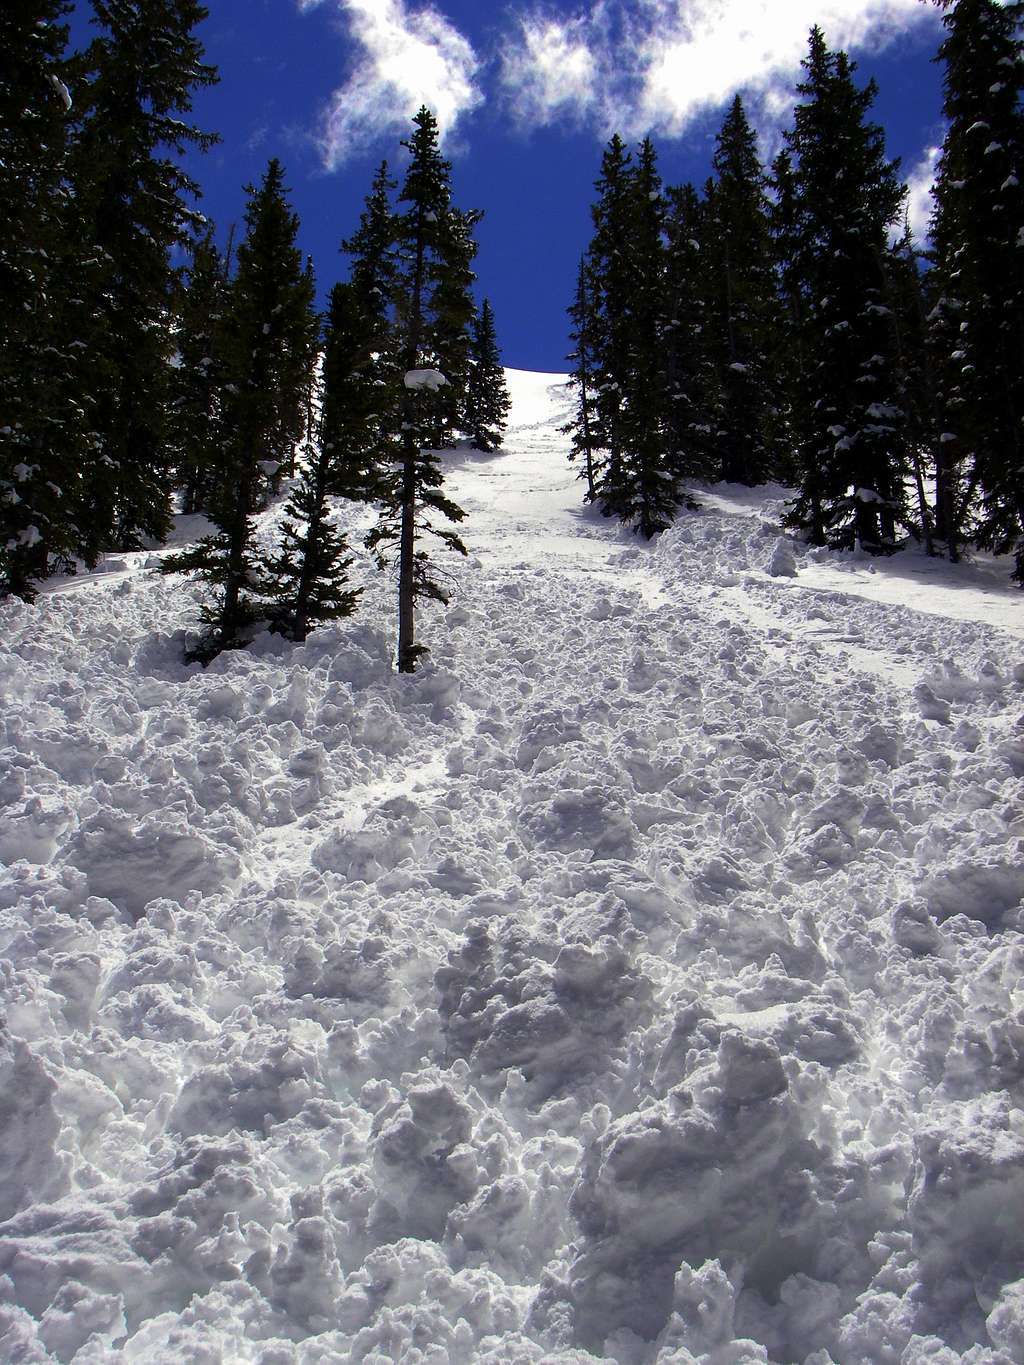 The avalanche in Silver Fork